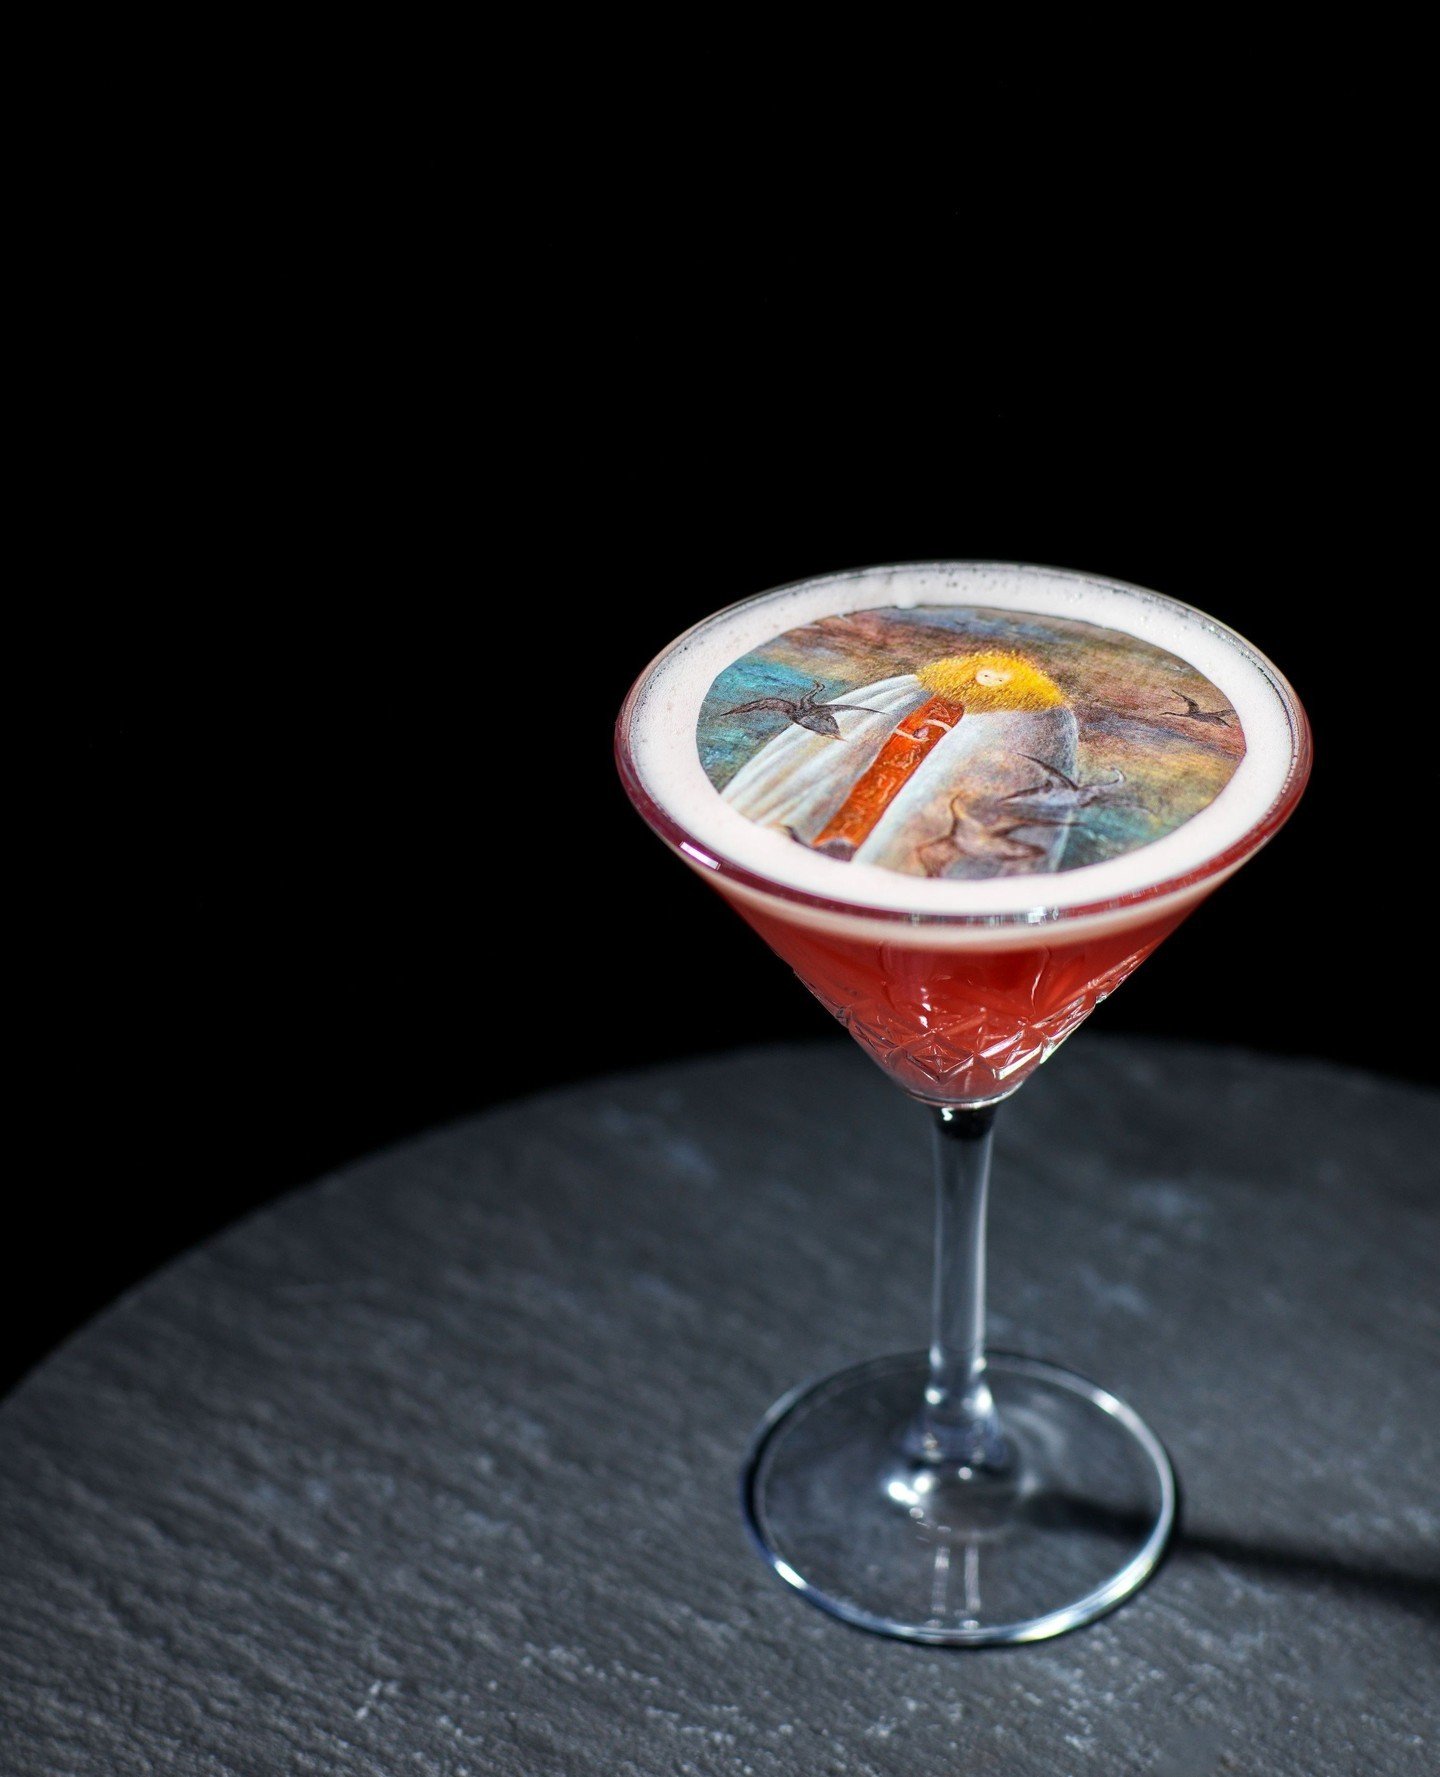 This #MartiniMonday brought to you by the Carrington Club cocktail at Gambit in Sebastian, Vail. ⁠
⁠
This one&rsquo;s a showstopper for its rice paper artwork garnish featuring the work of Leonora Carrington. It&rsquo;s almost too stunning to drink &